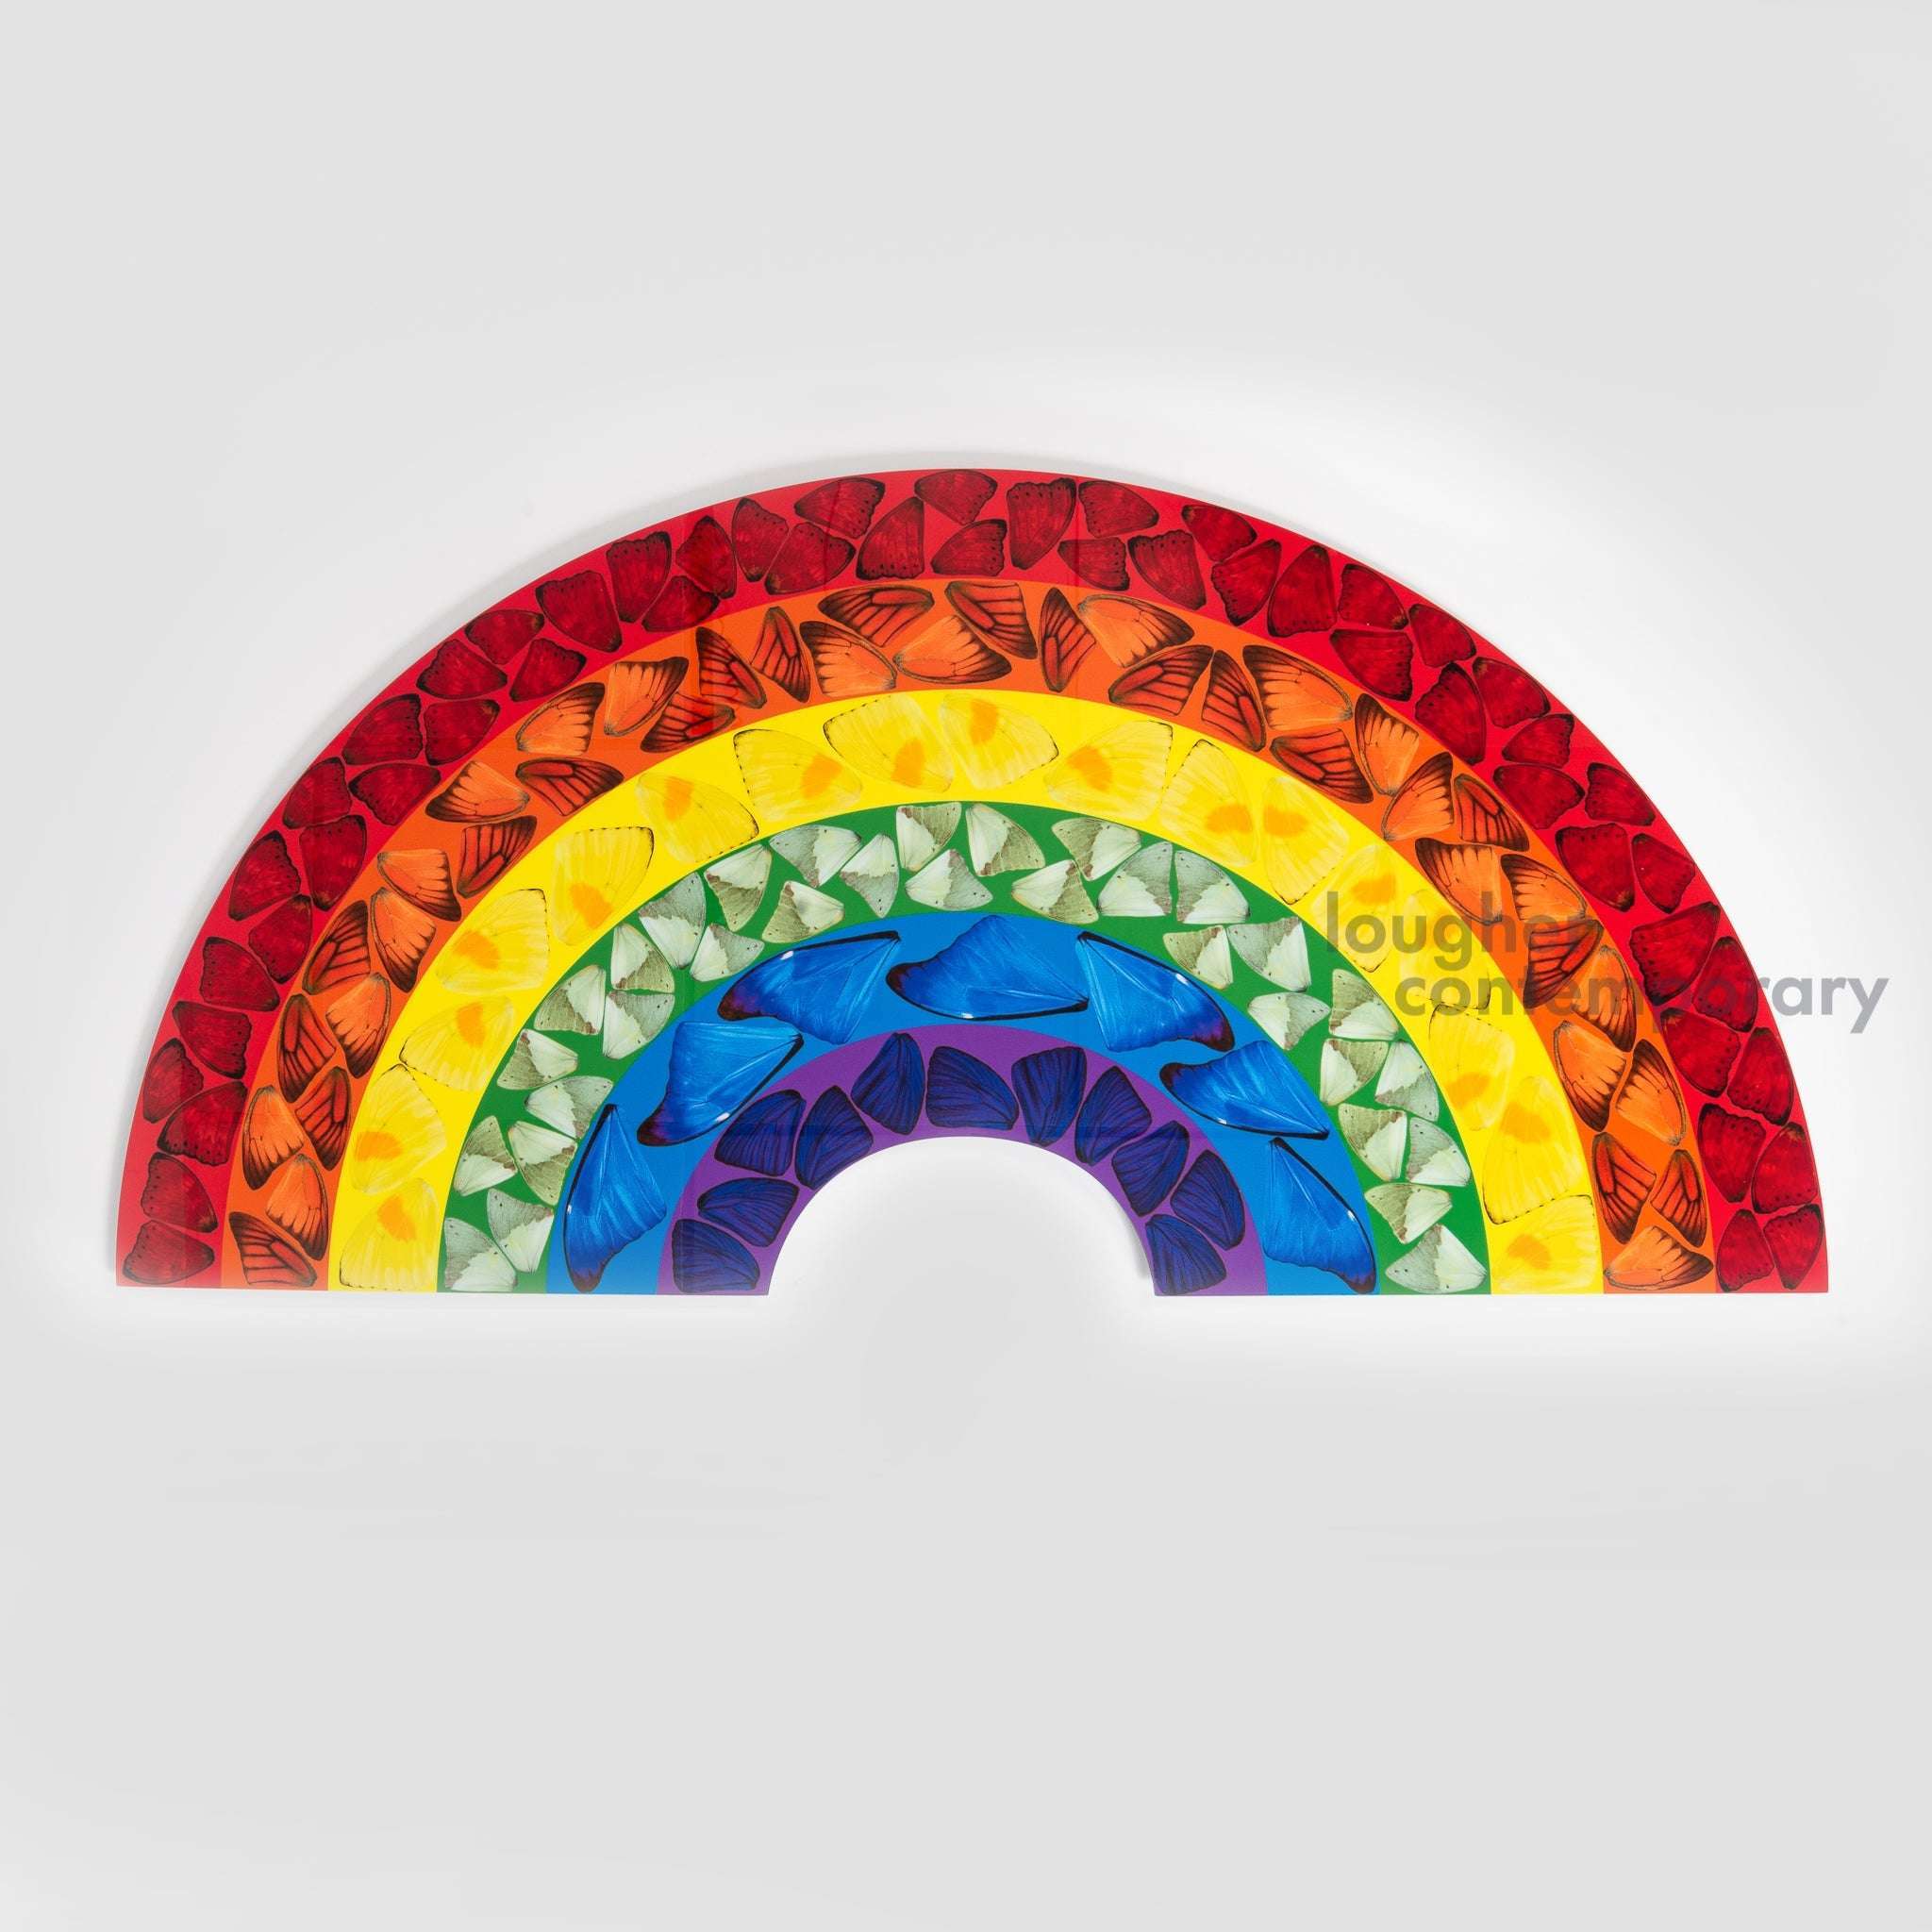 Damien Hirst, H7-1 Butterfly Rainbow (Large), 2020 For Sale - Lougher Contemporary